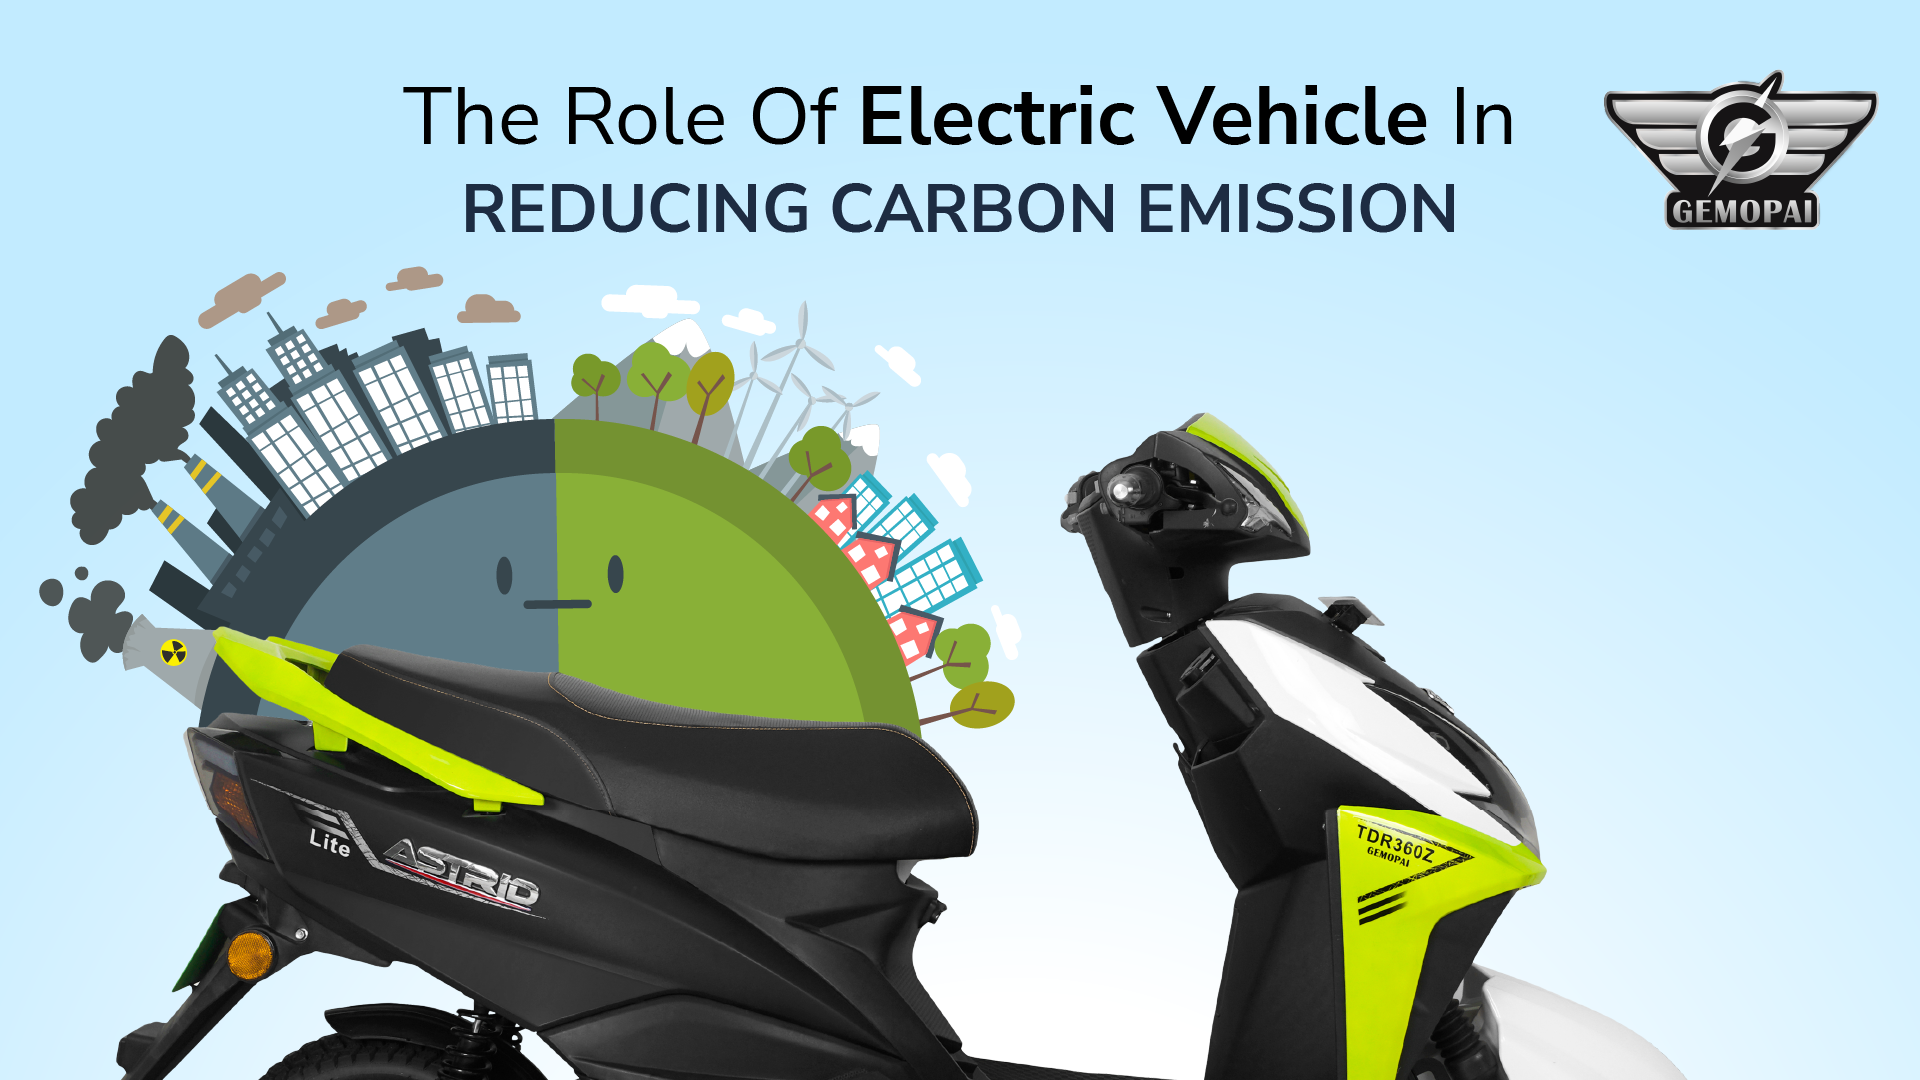 The Role of Electric Vehicles in Reducing Carbon Emissions